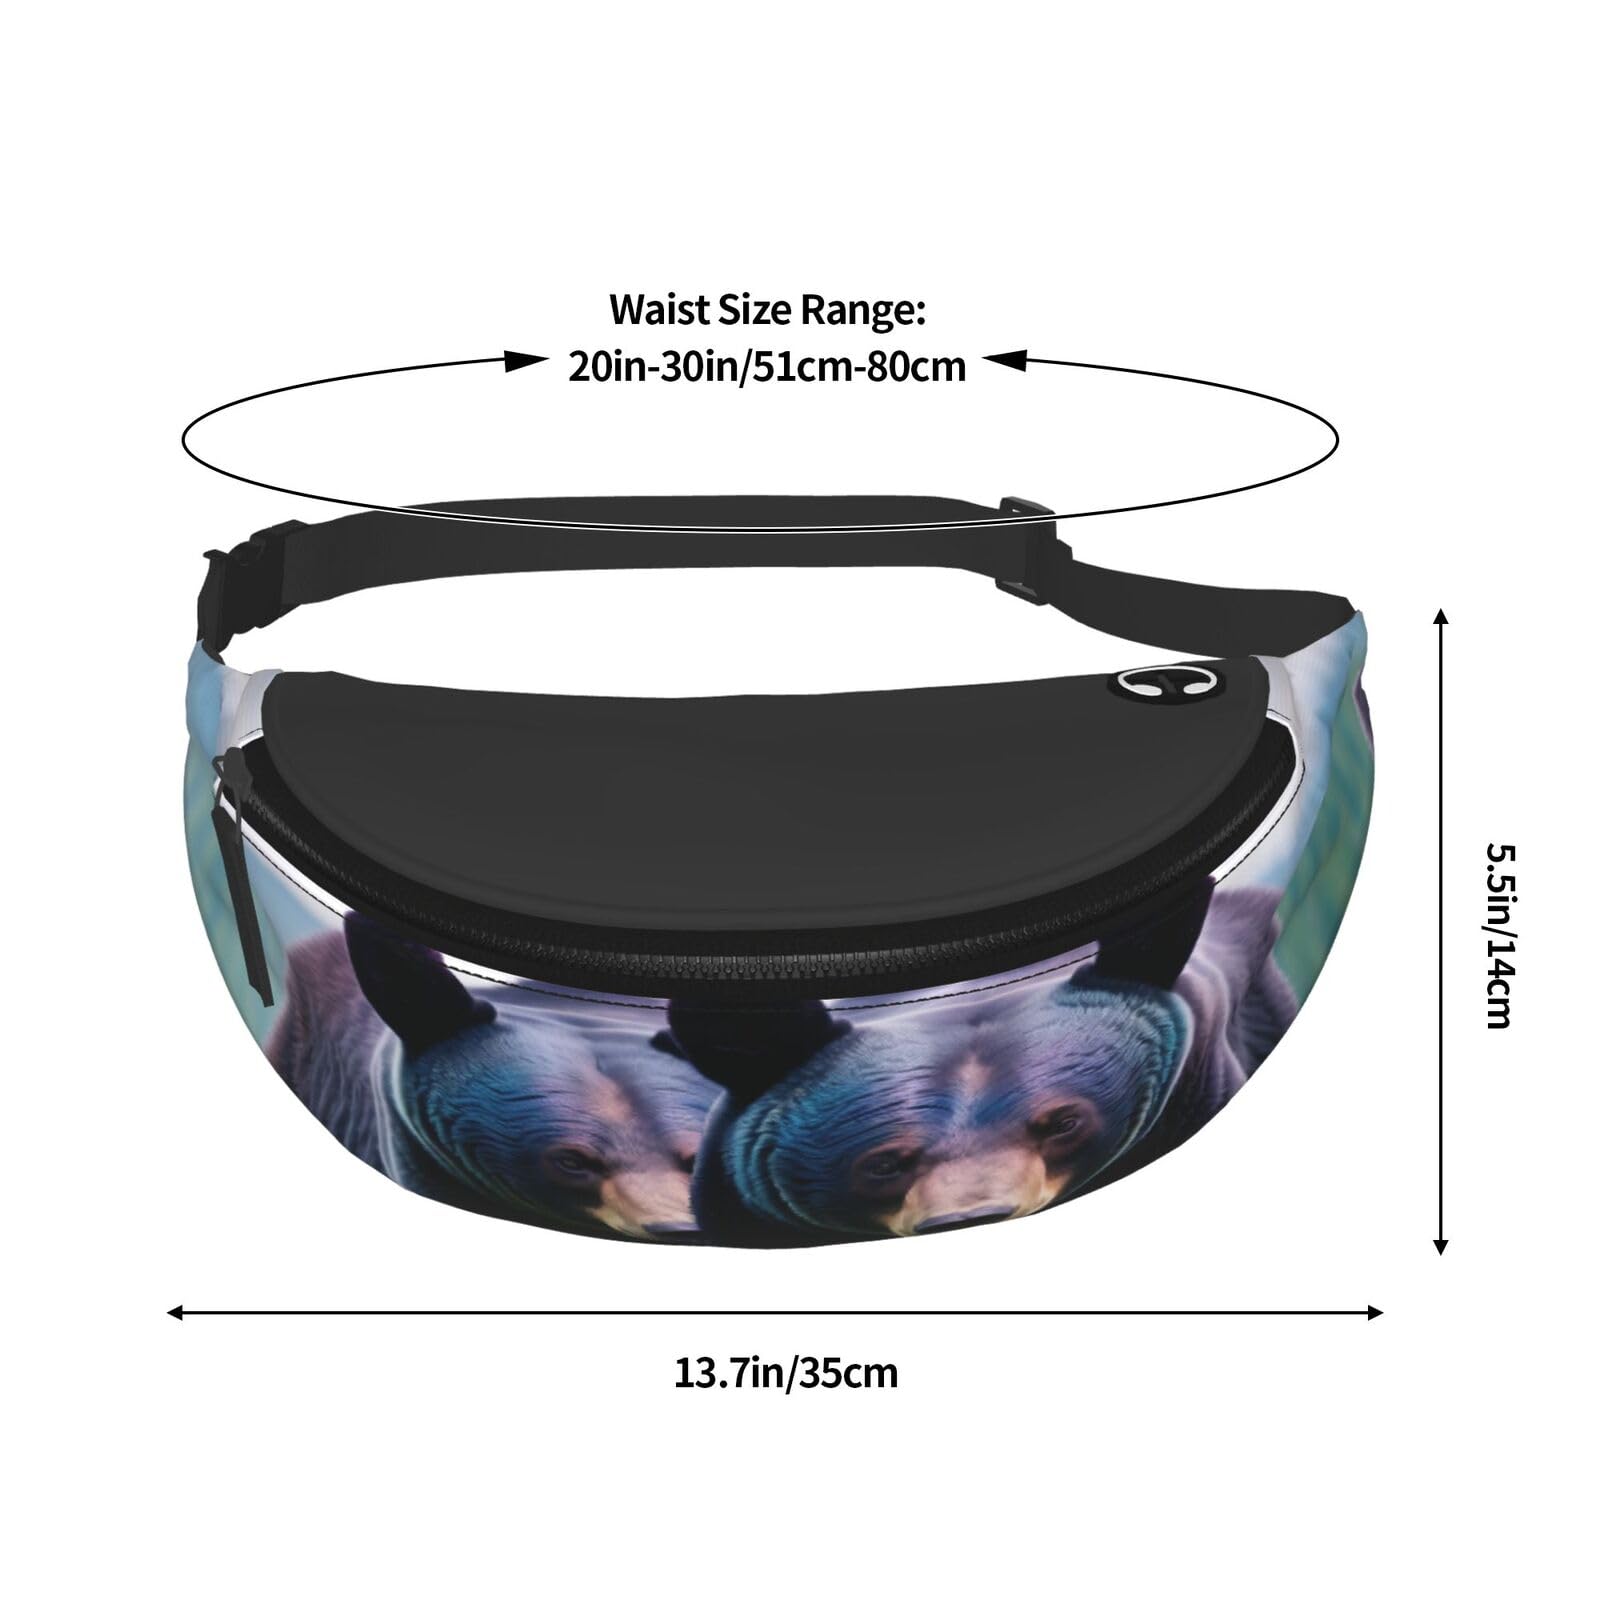 Bears Fanny Pack For Women And Men Fashion Waist Bag With Adjustable Strap For Hiking Running Cycling